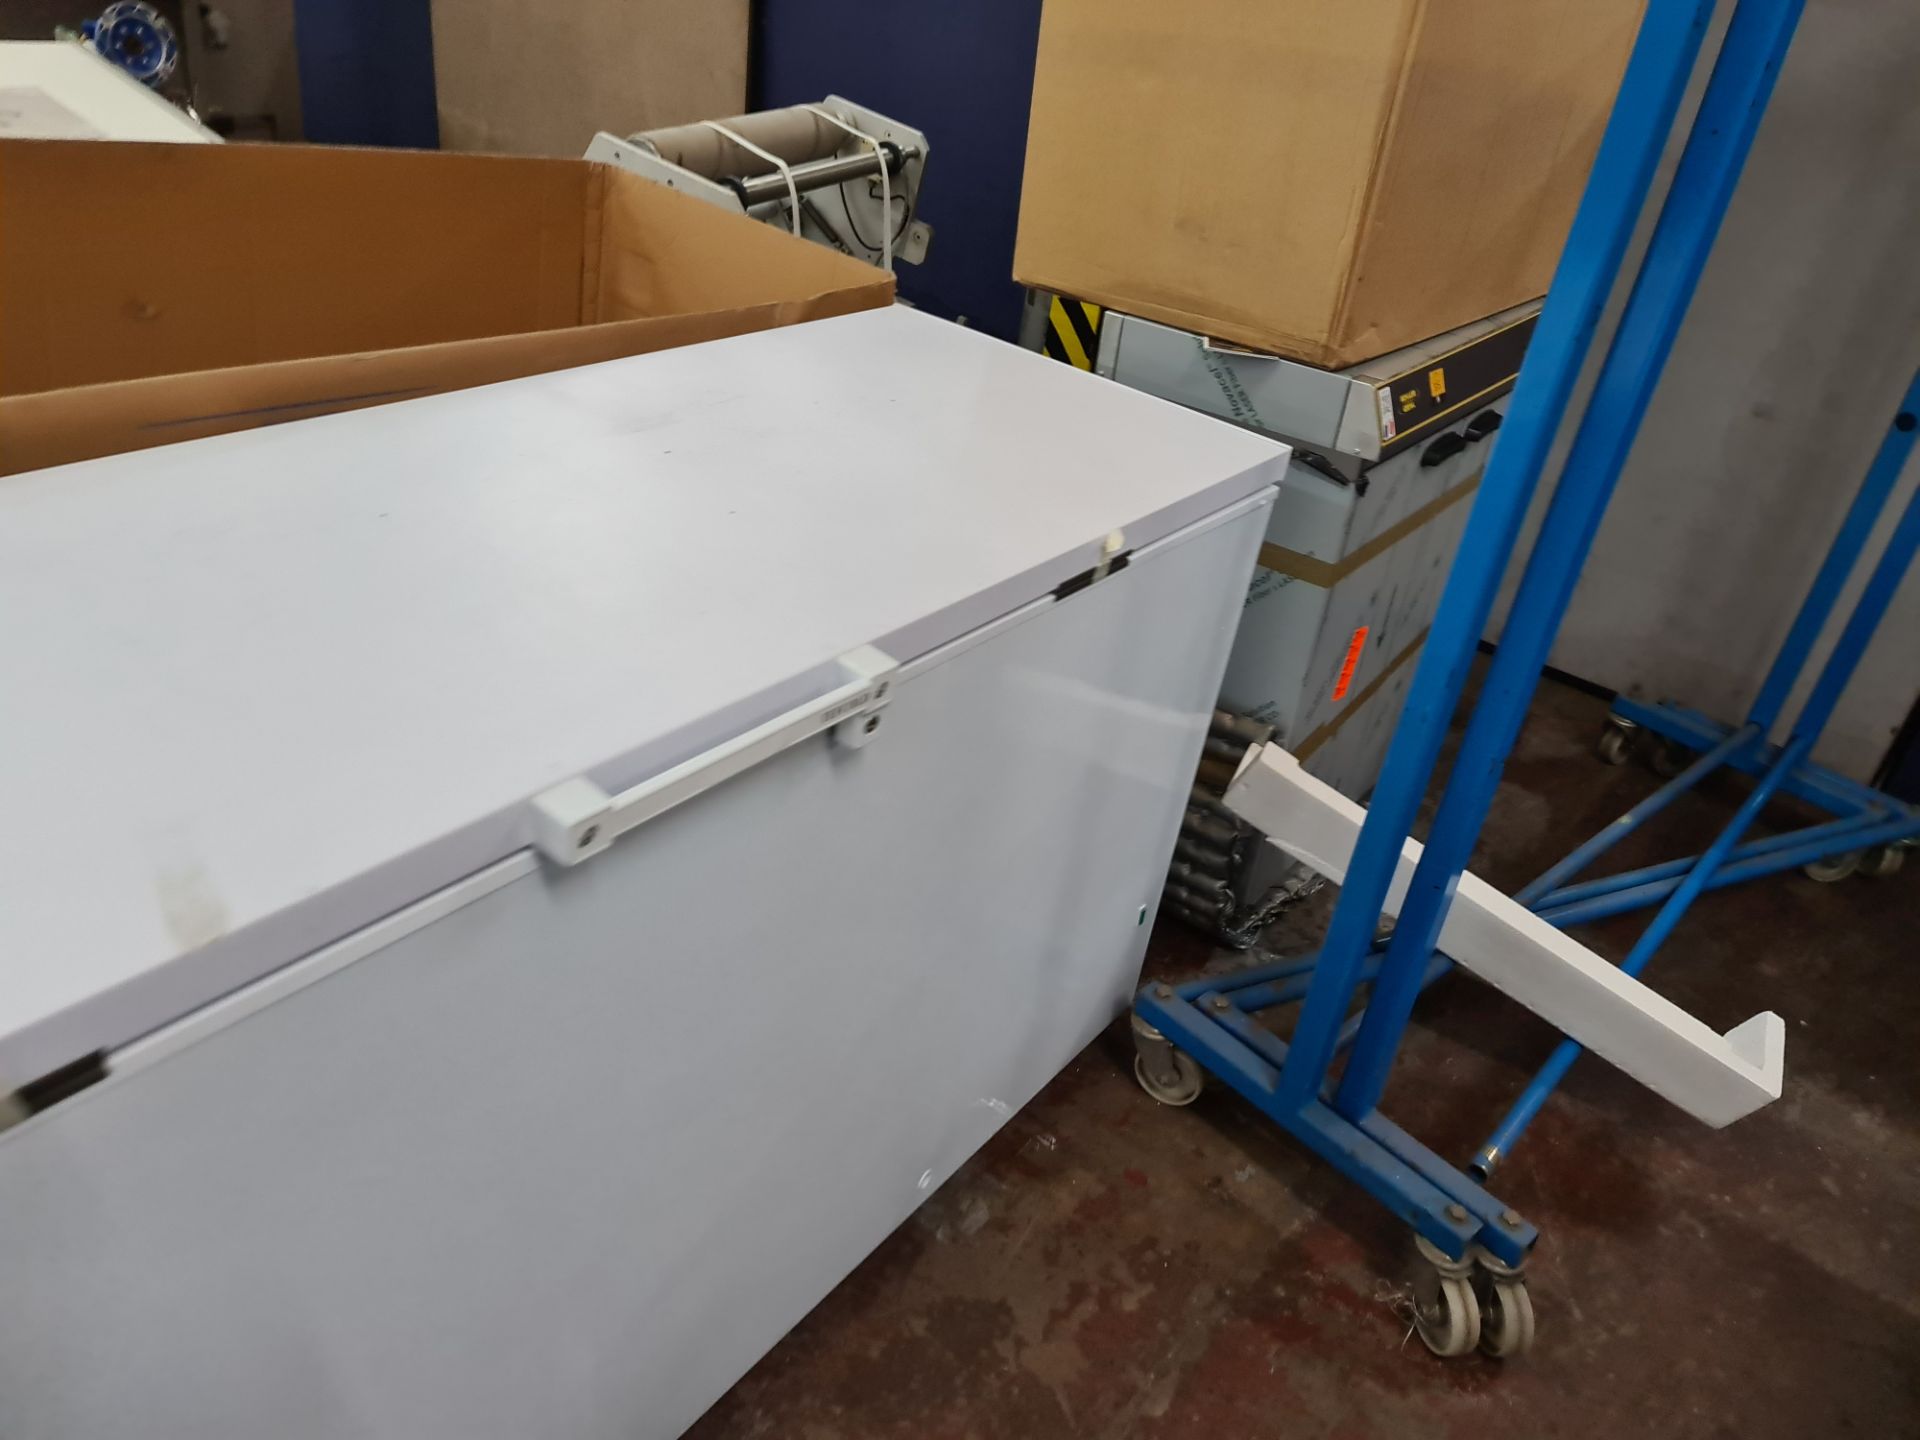 Tefcold 1.8 metre solid top chest freezer, model FR605SL, with 2 keys, appears new/unused. - Image 3 of 9